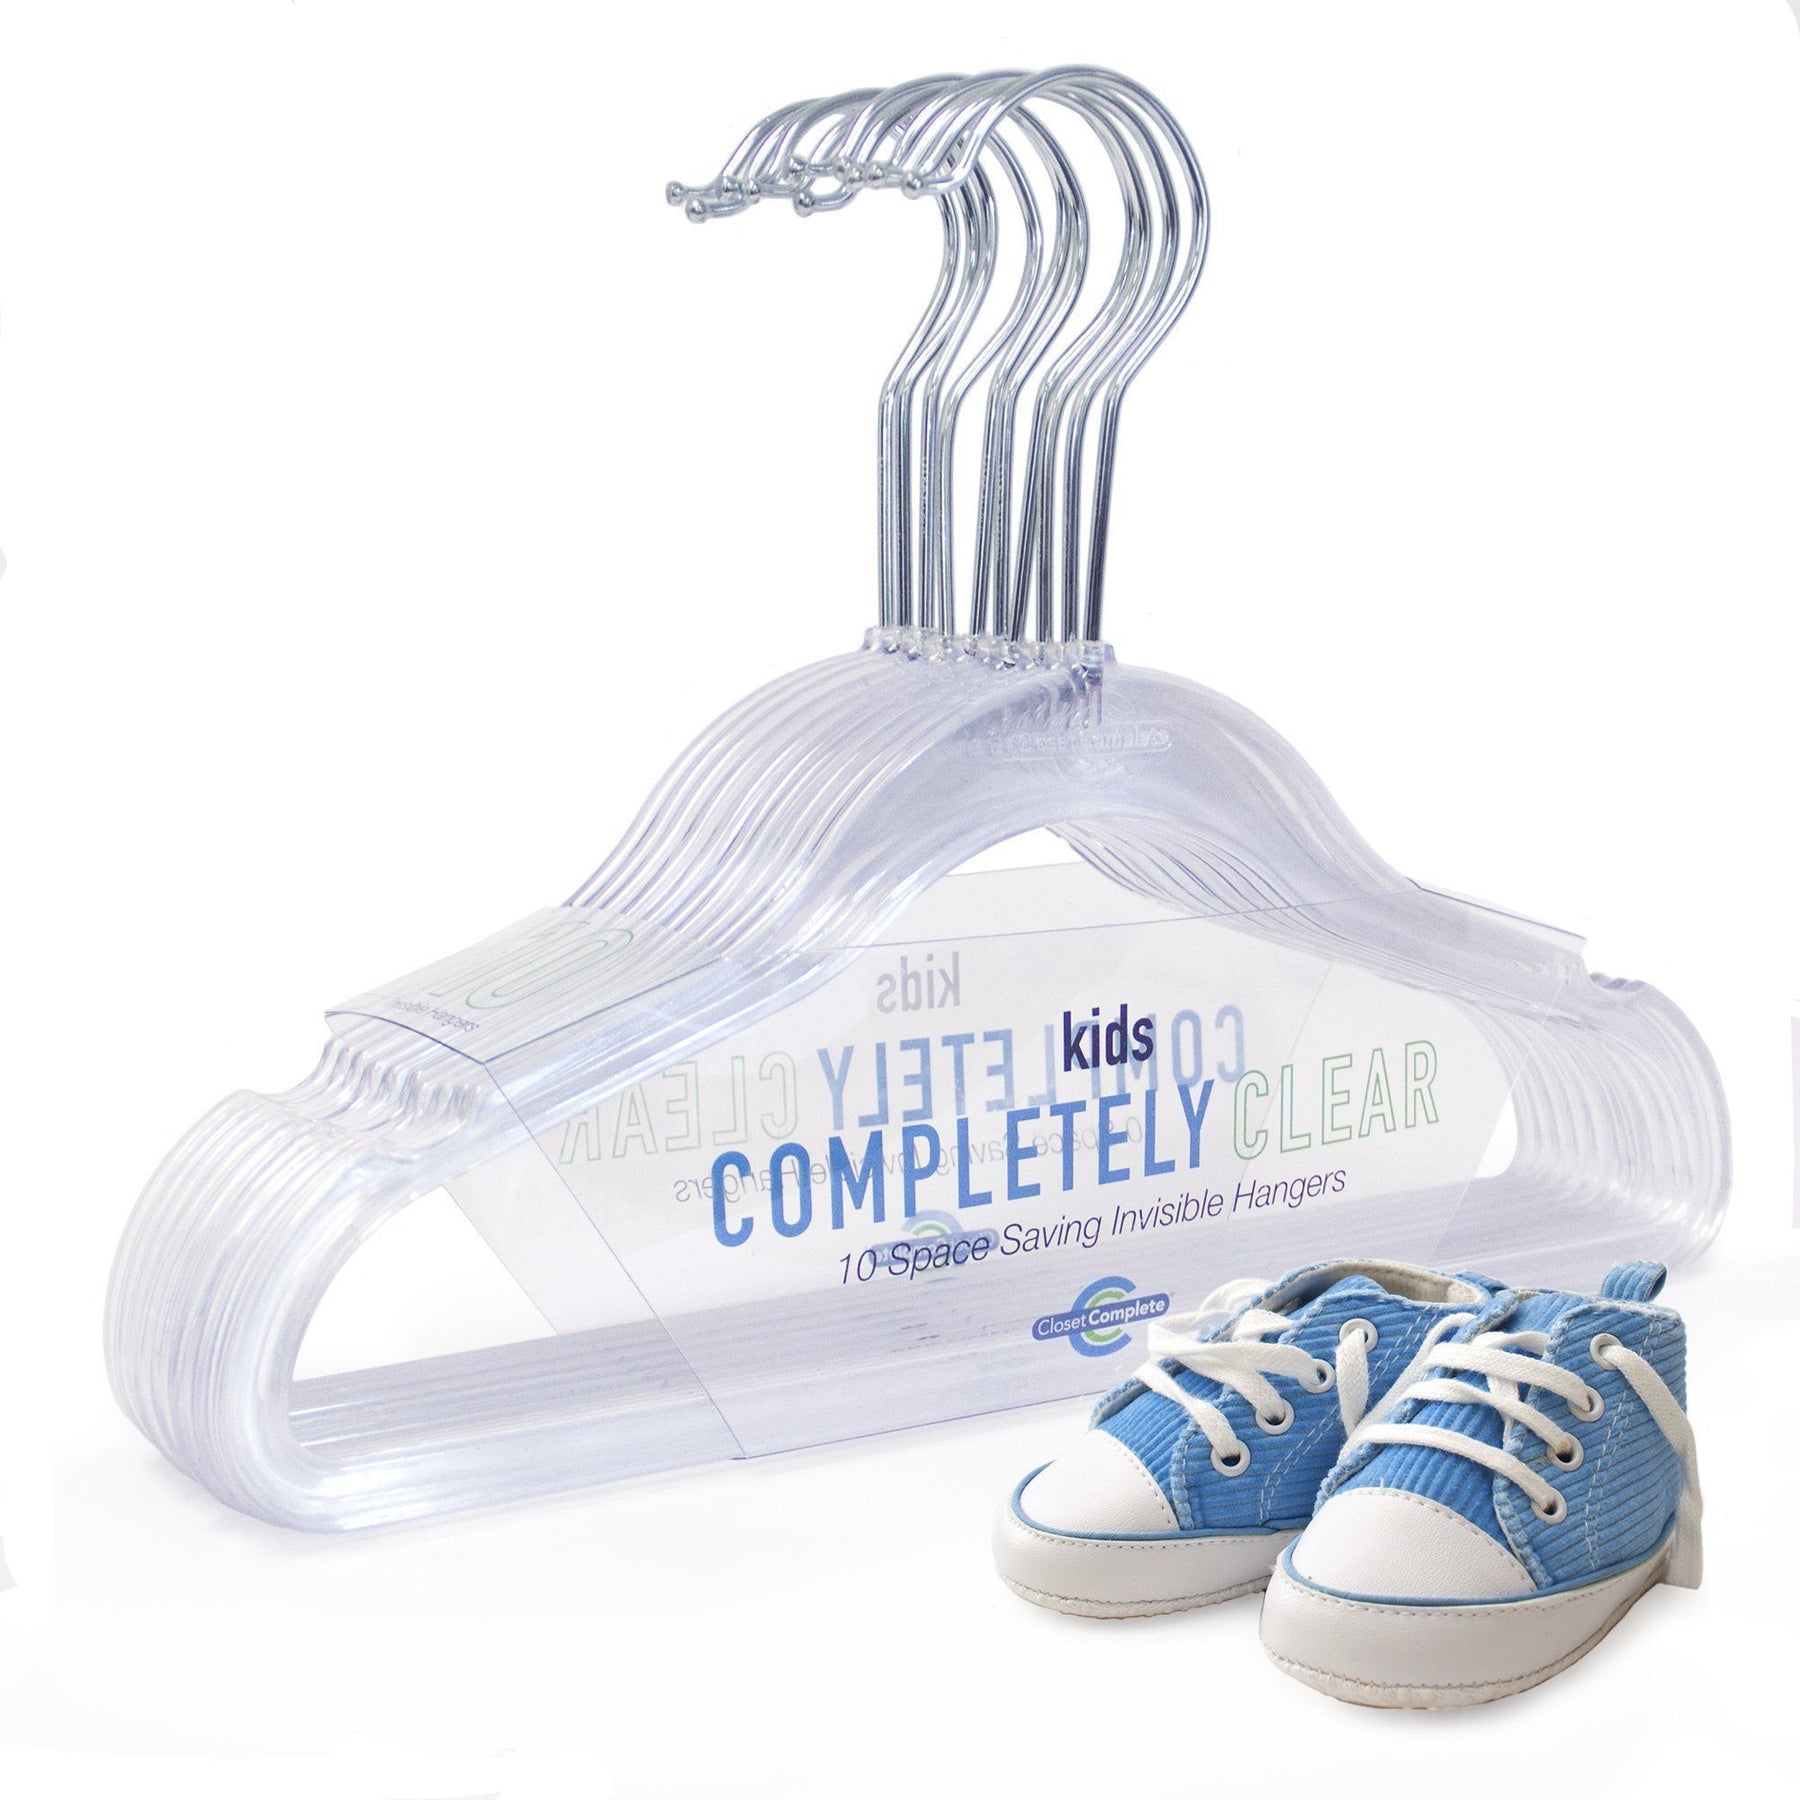 https://www.closetcomplete.com/cdn/shop/products/closet-complete-acrylic-hangers-kids-baby-sized-completely-clear-acrylic-hangers-69190-7162302070869_1800x1800.jpg?v=1552520336